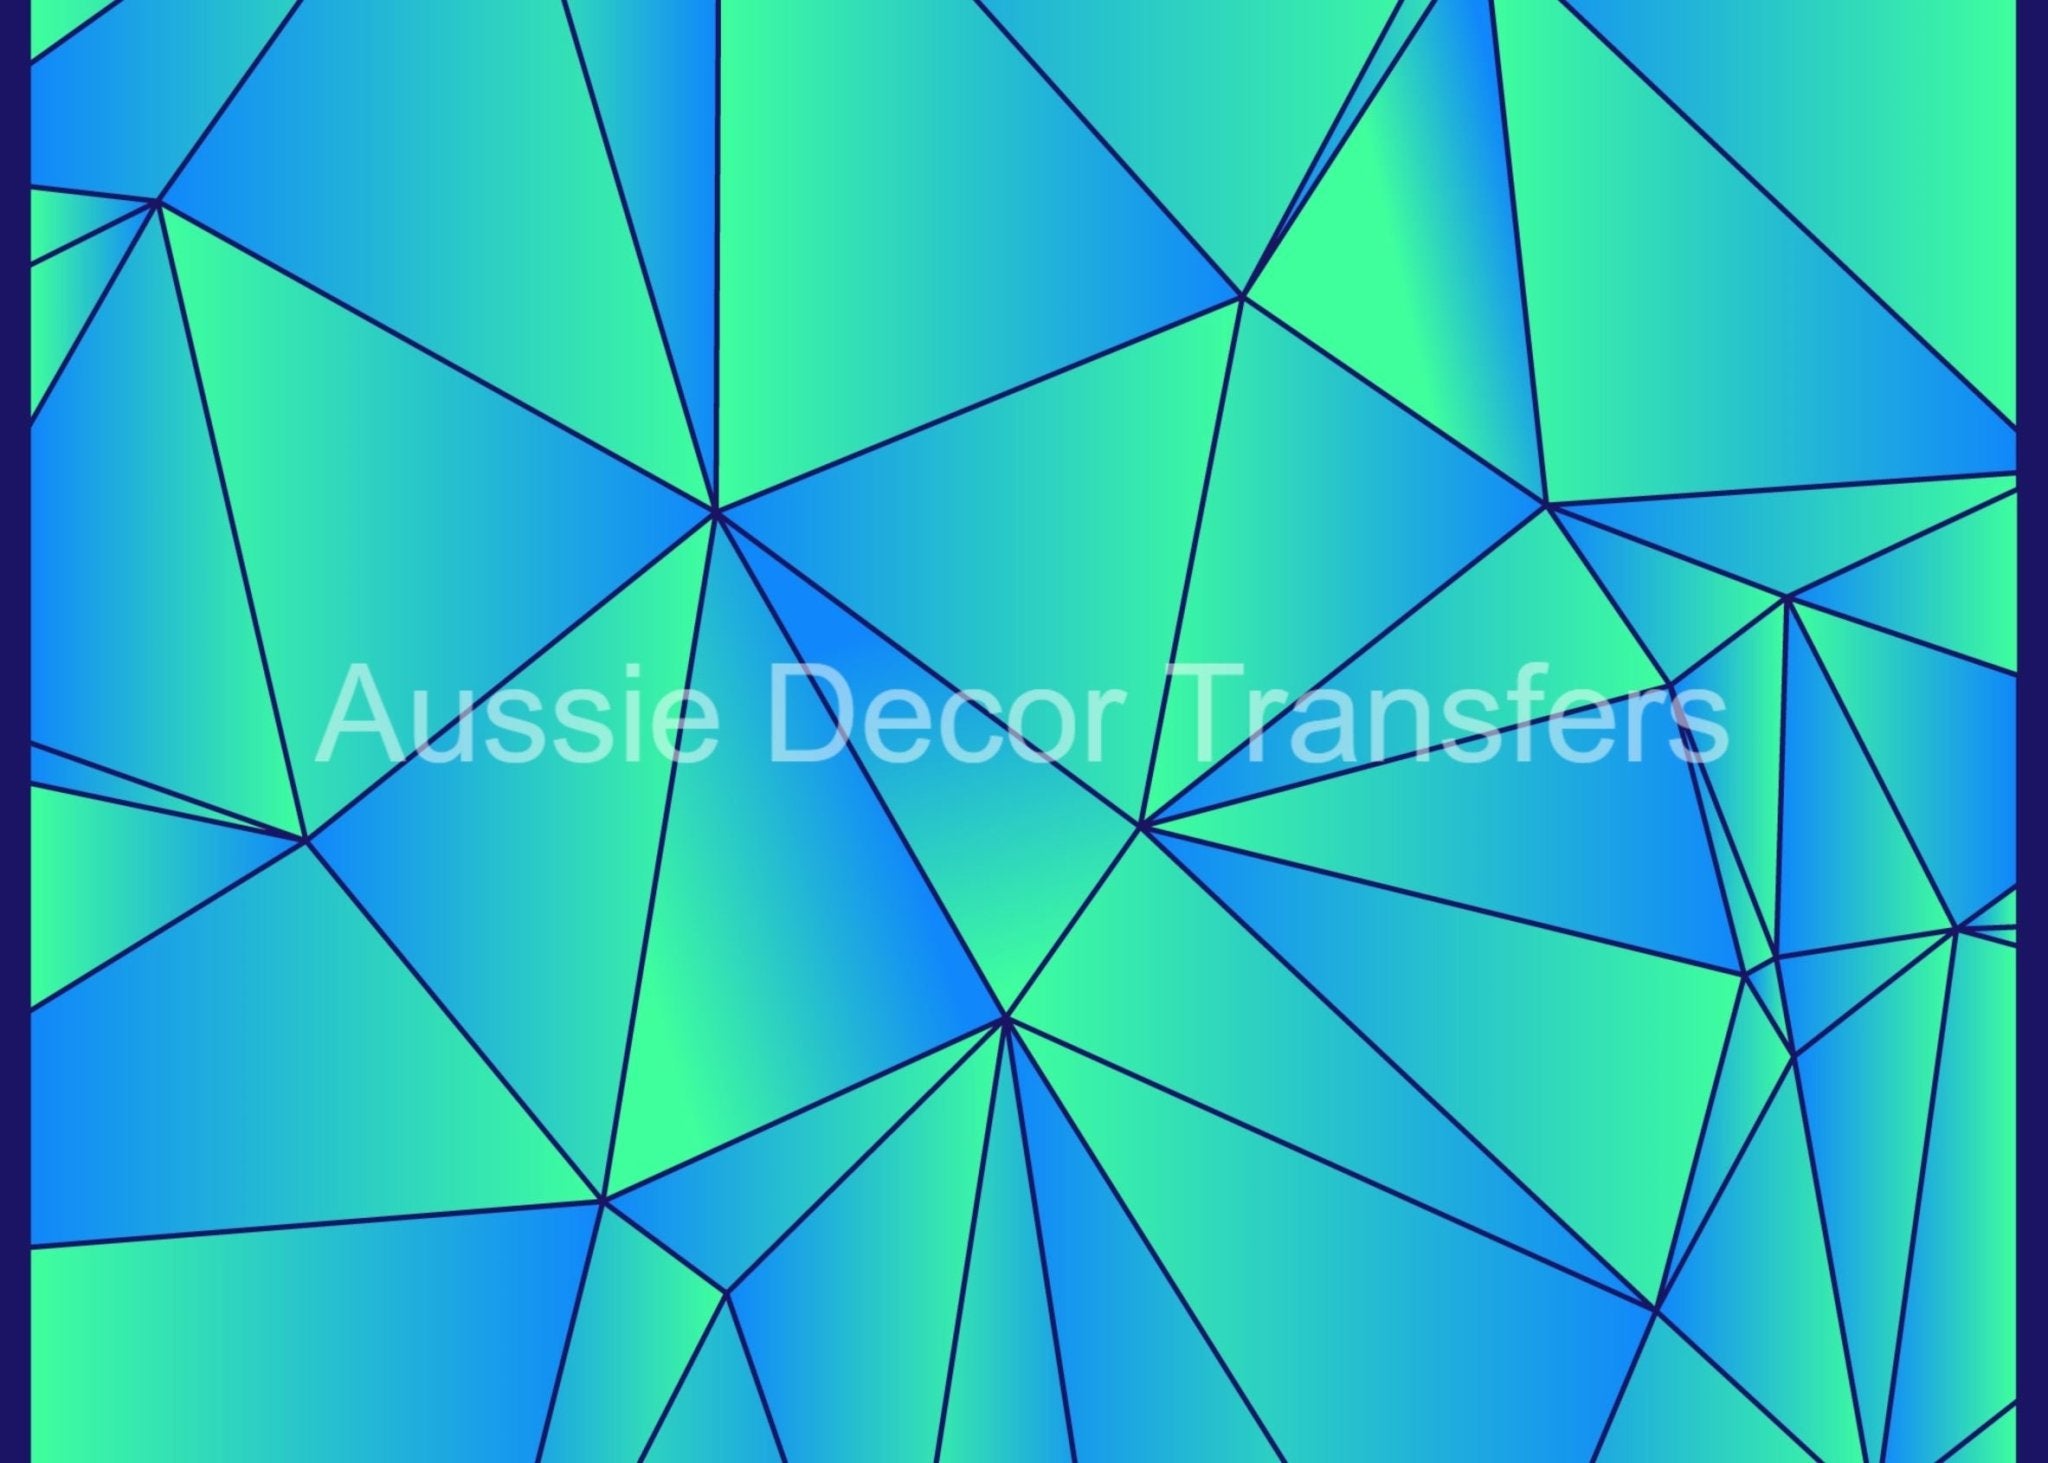 Aussie Decor Transfers Poster Print Blue & Green Geo - Not Your Average Poster Print! - AUS ONLY